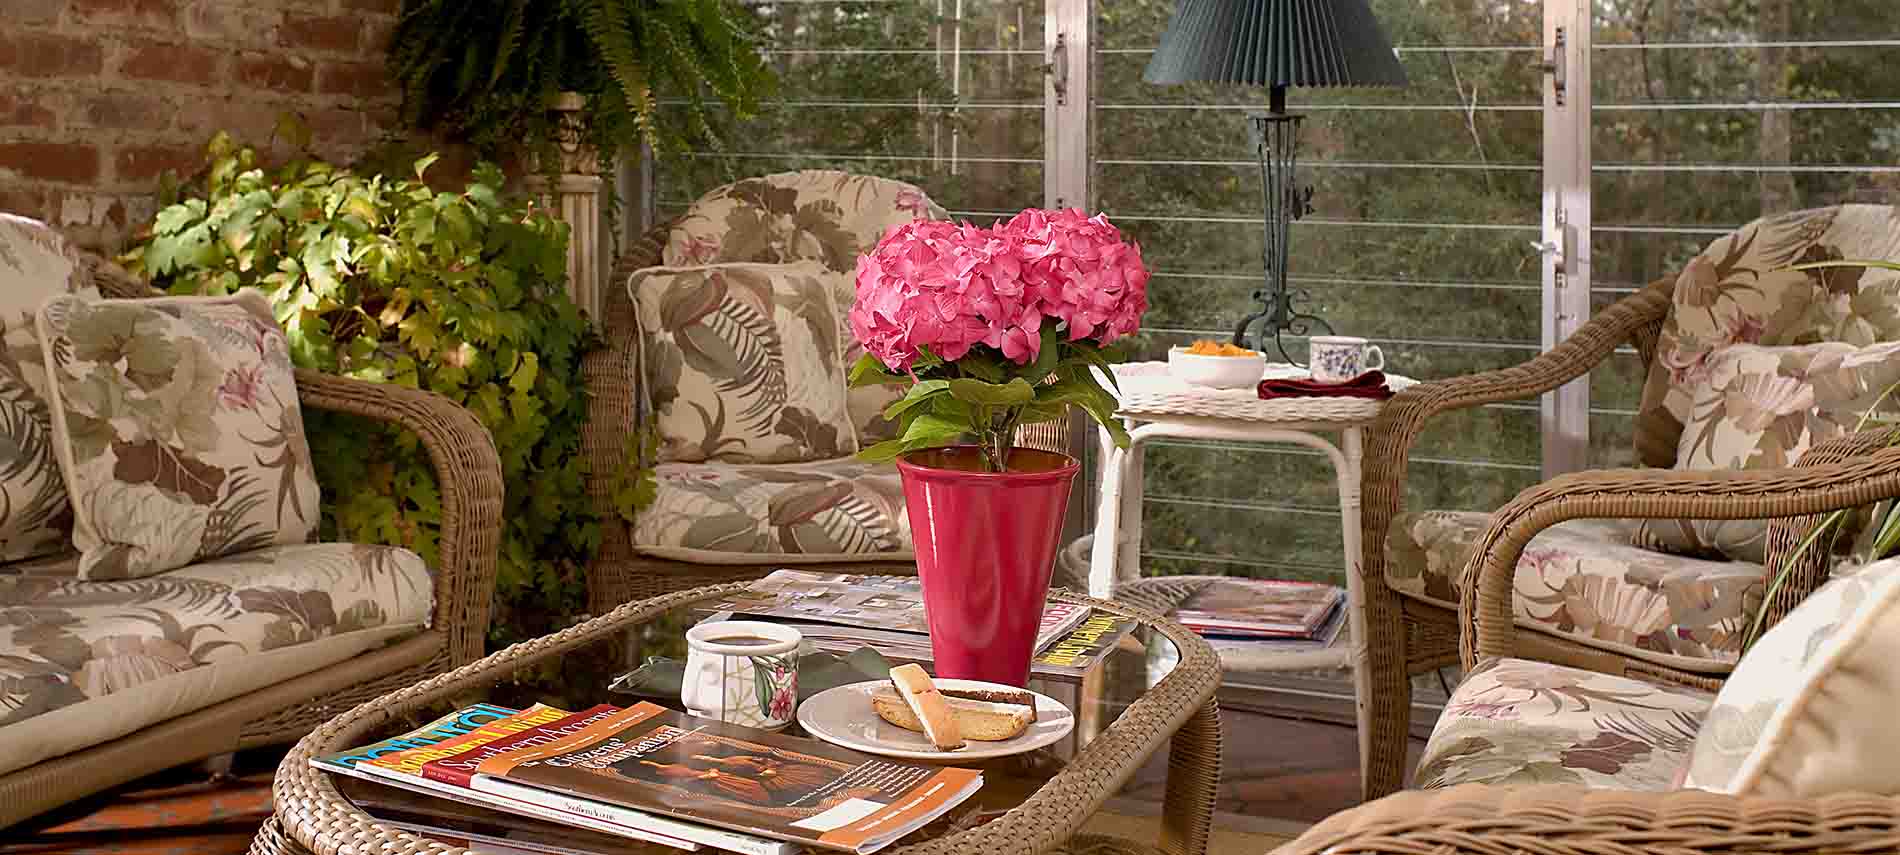 pink potted hydrangea plant on wicker and glass table with magazines and plate of biscotti